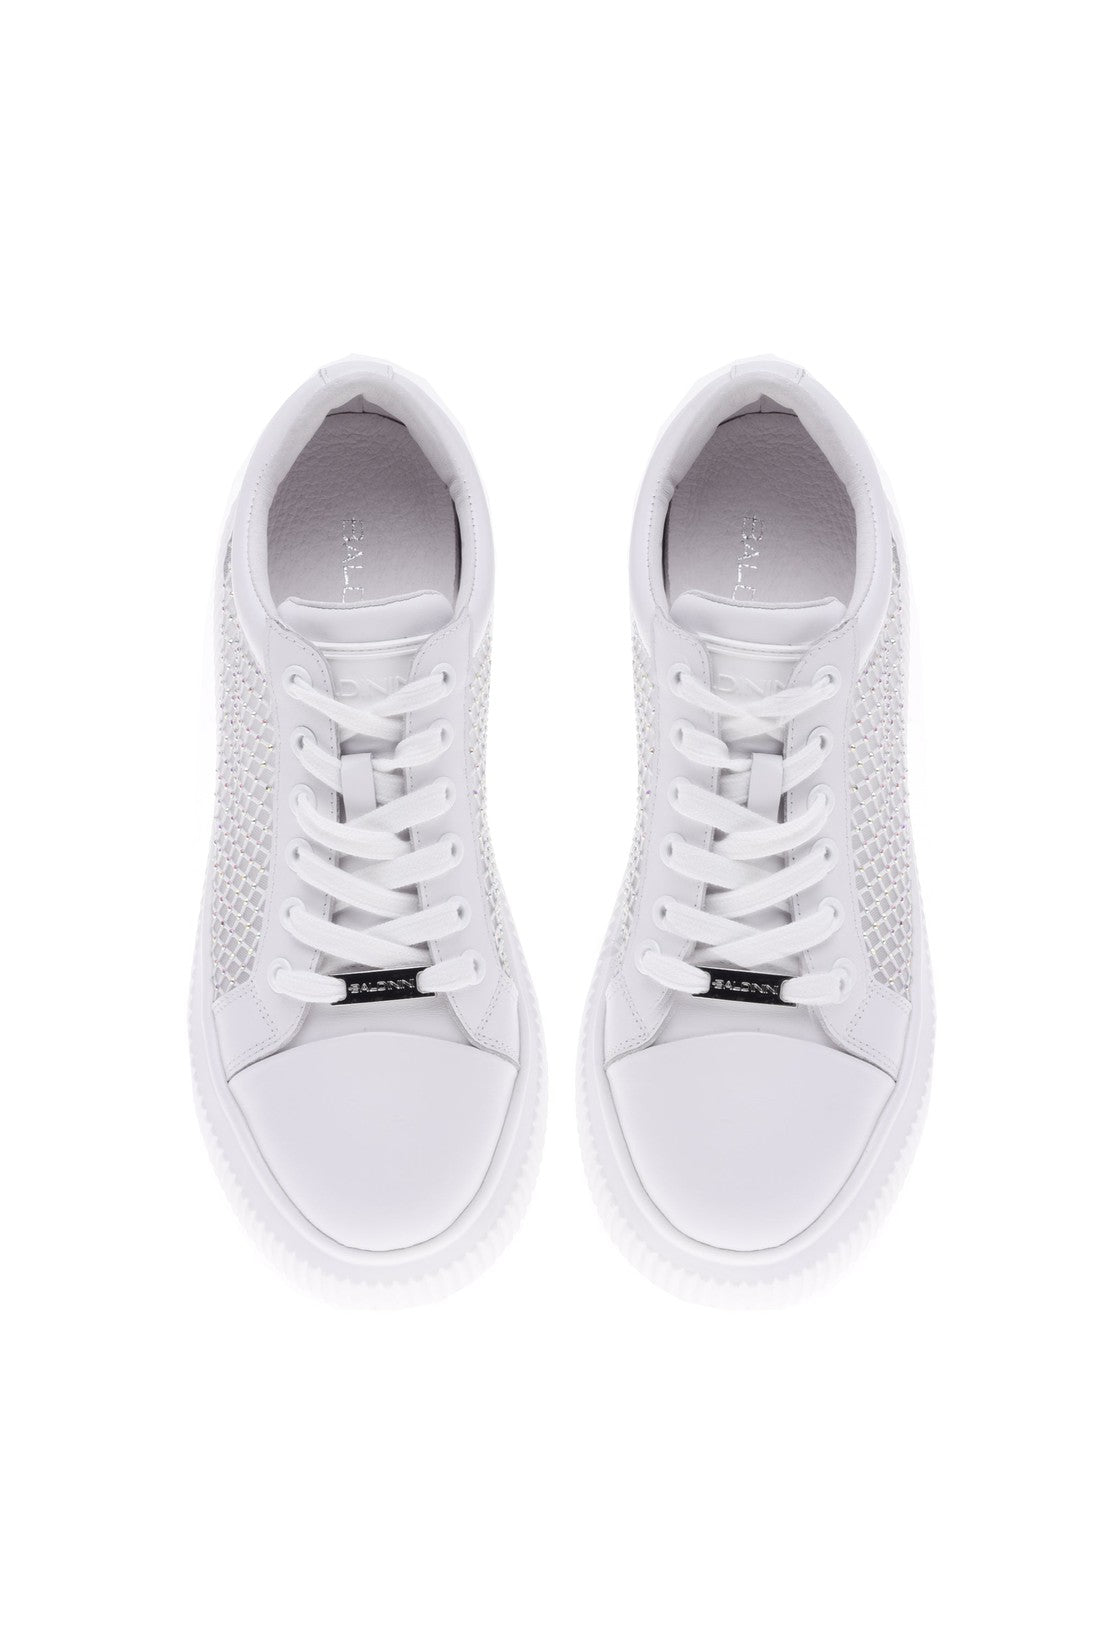 BALDININI-OUTLET-SALE-Sneaker-in-white-calfskin-with-mesh-Sneaker-ARCHIVE-COLLECTION-2.jpg